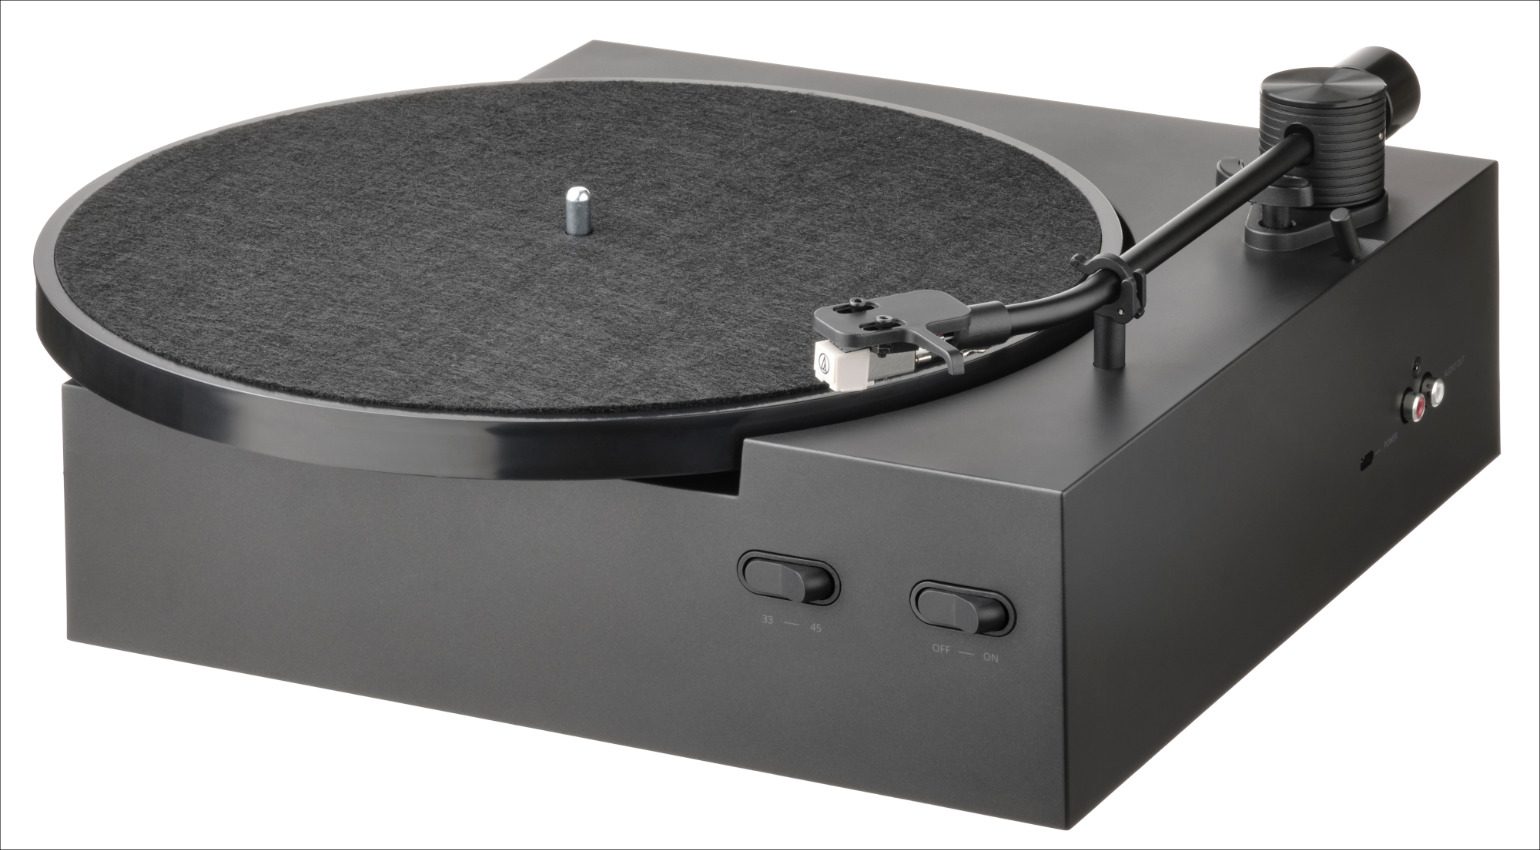 The OBEGRÄNSAD record player is compatible with IKEA